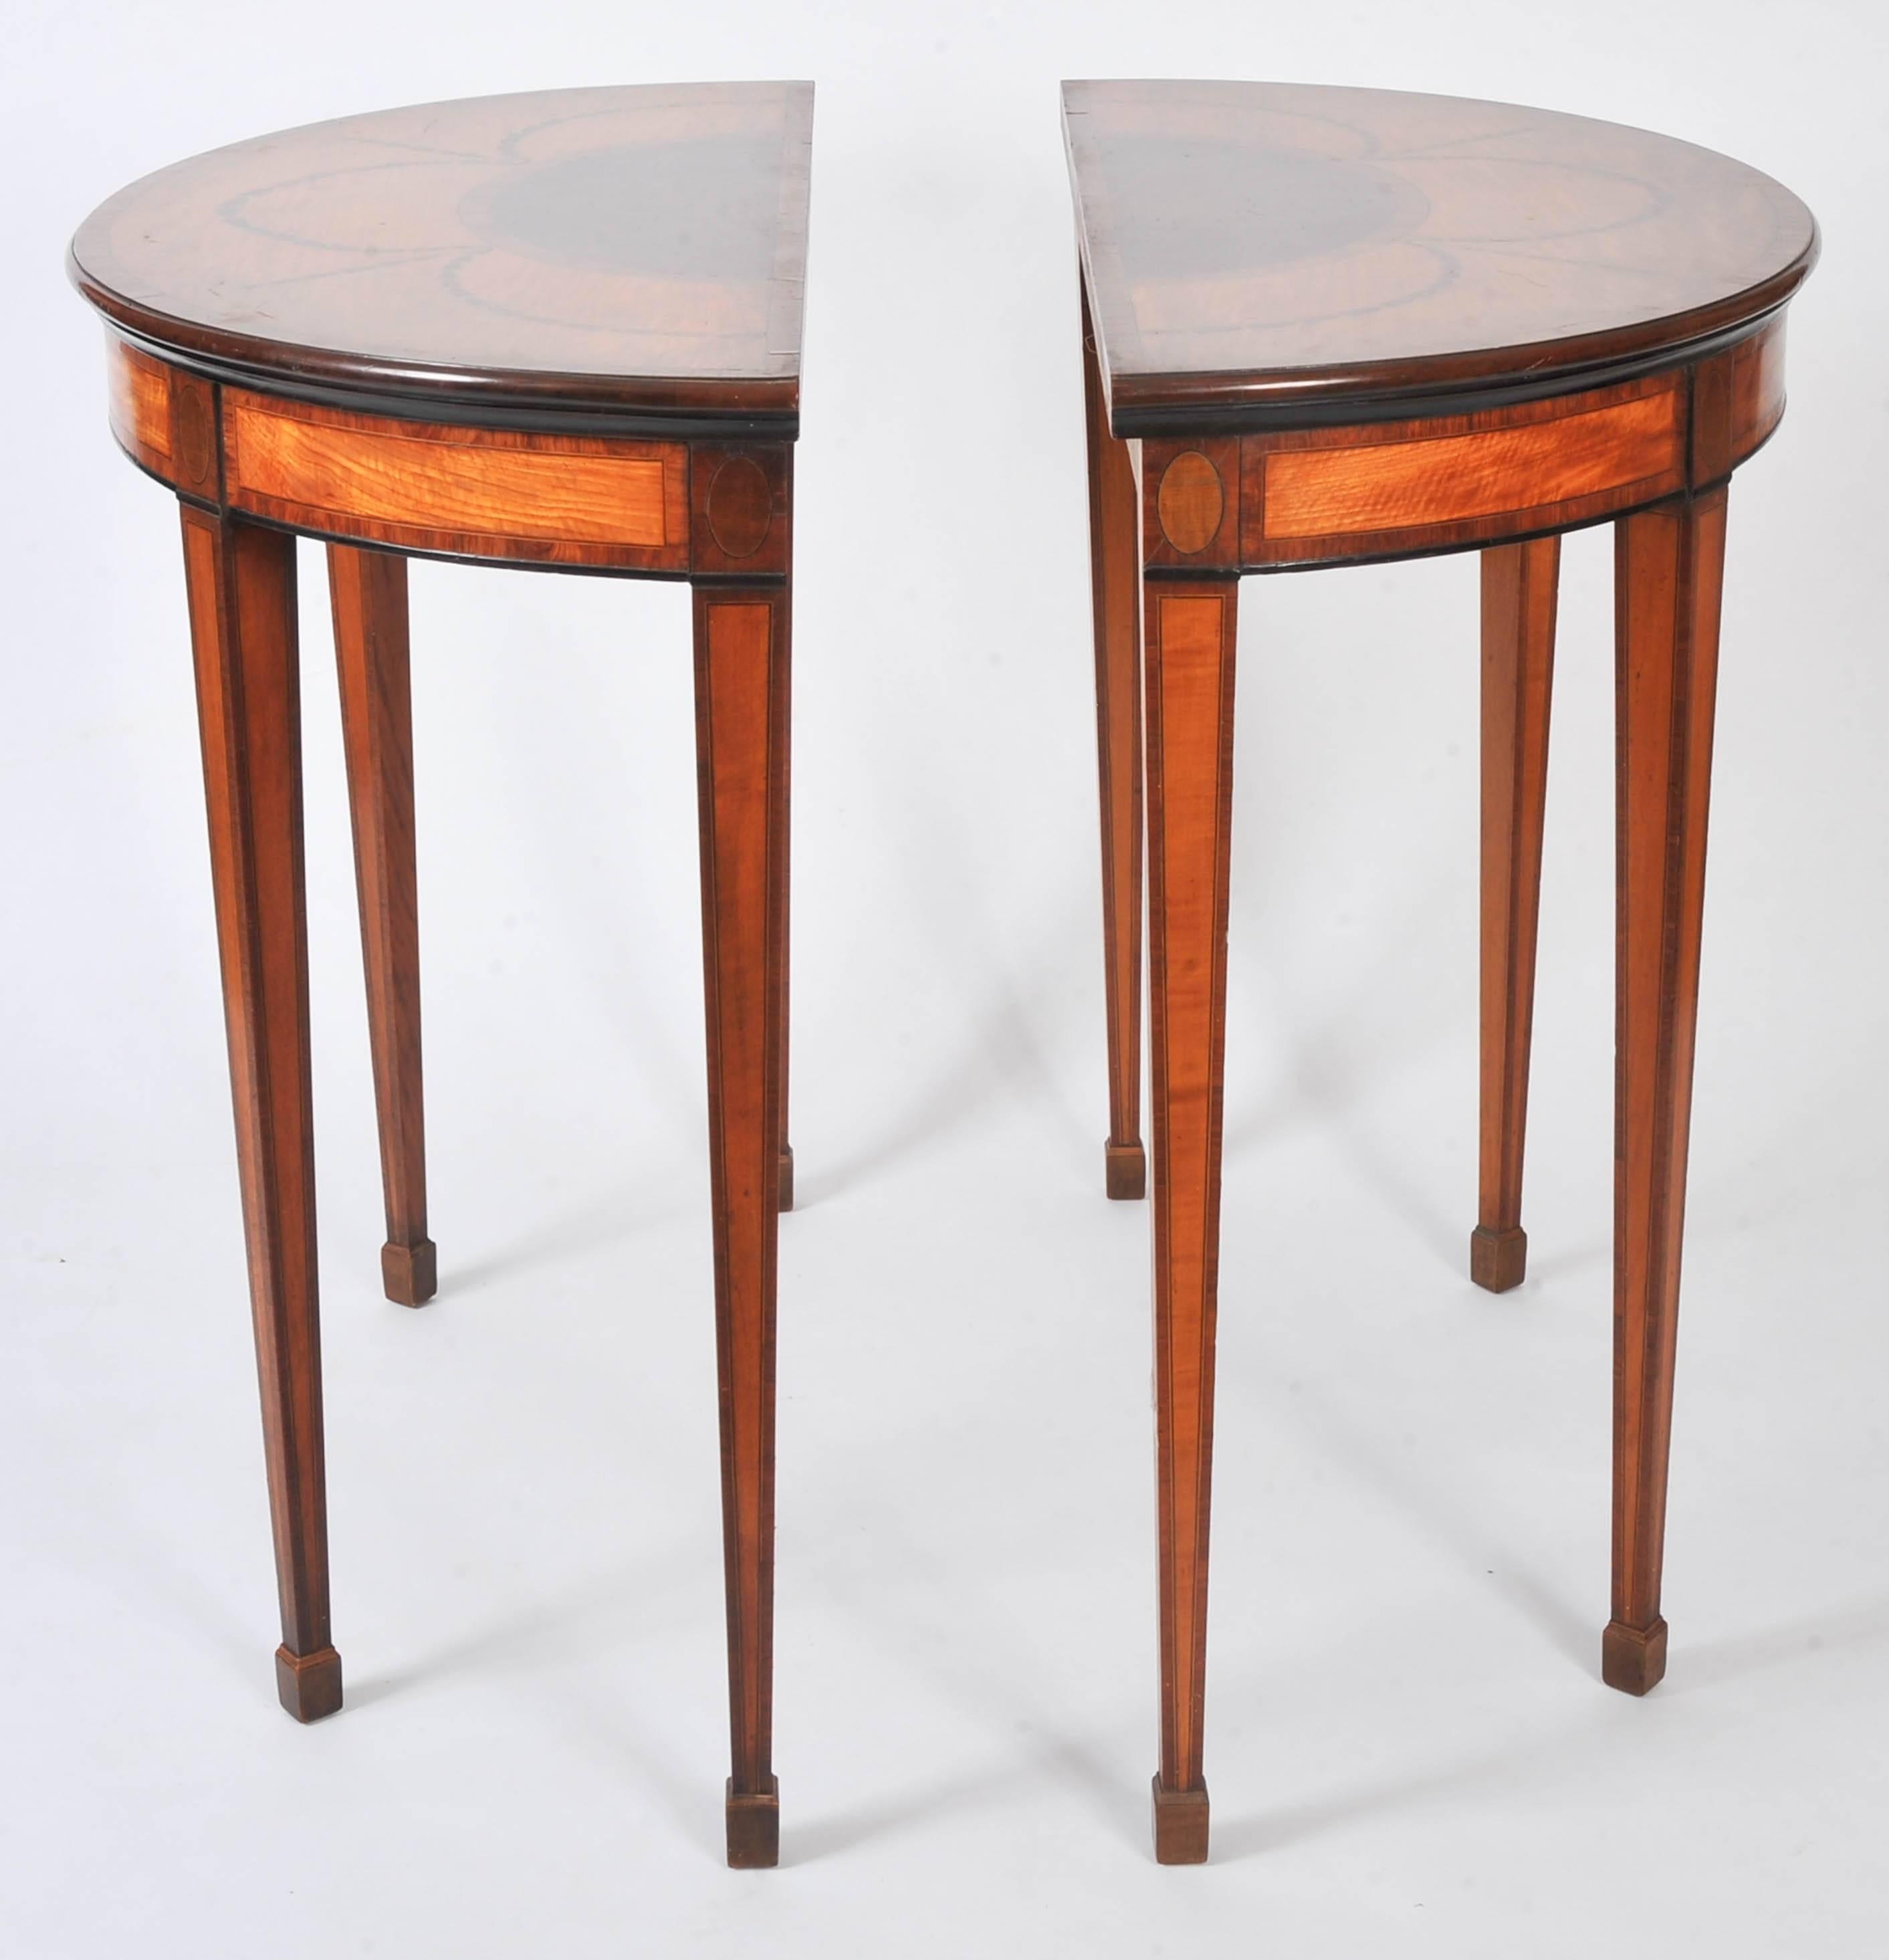 This charming pair of semi-elliptical side tables features 18th century satinwood tops, inlaid with swags and festoons in the classical manner. The tops are crossbanded with rosewood and hare wood inset and detailing. They are supported on four